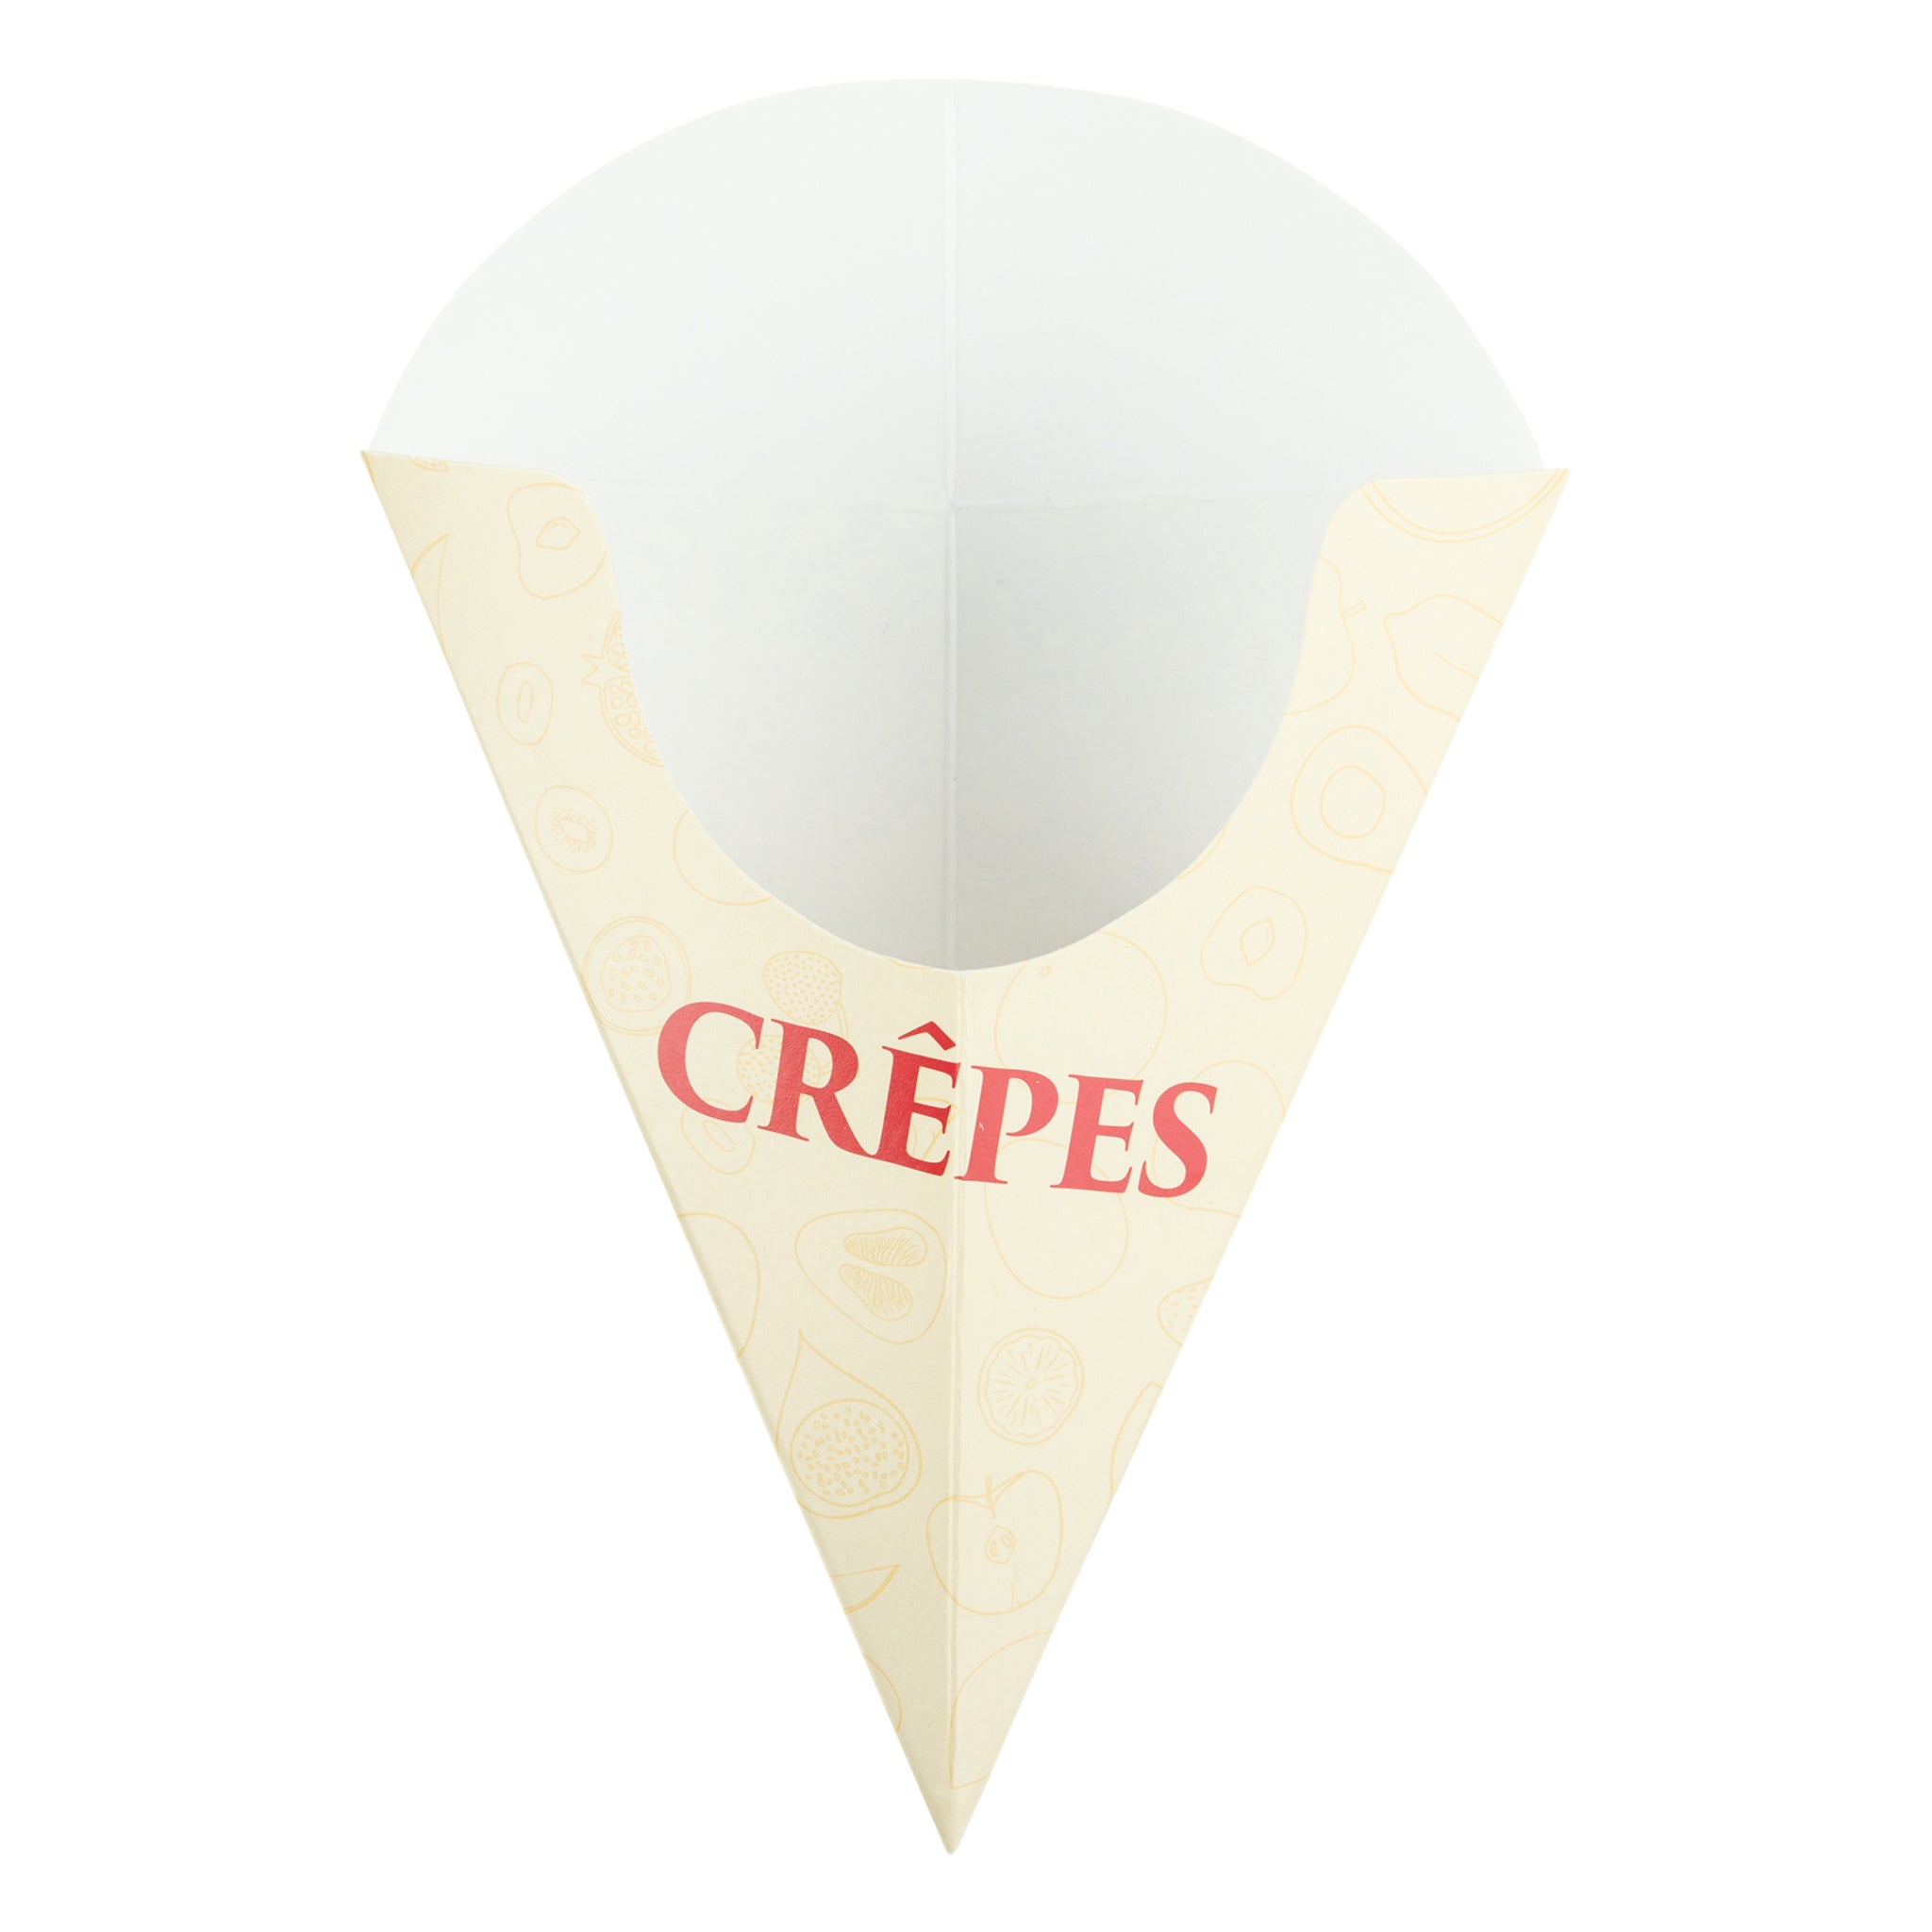 Crepe Cone Holders with design